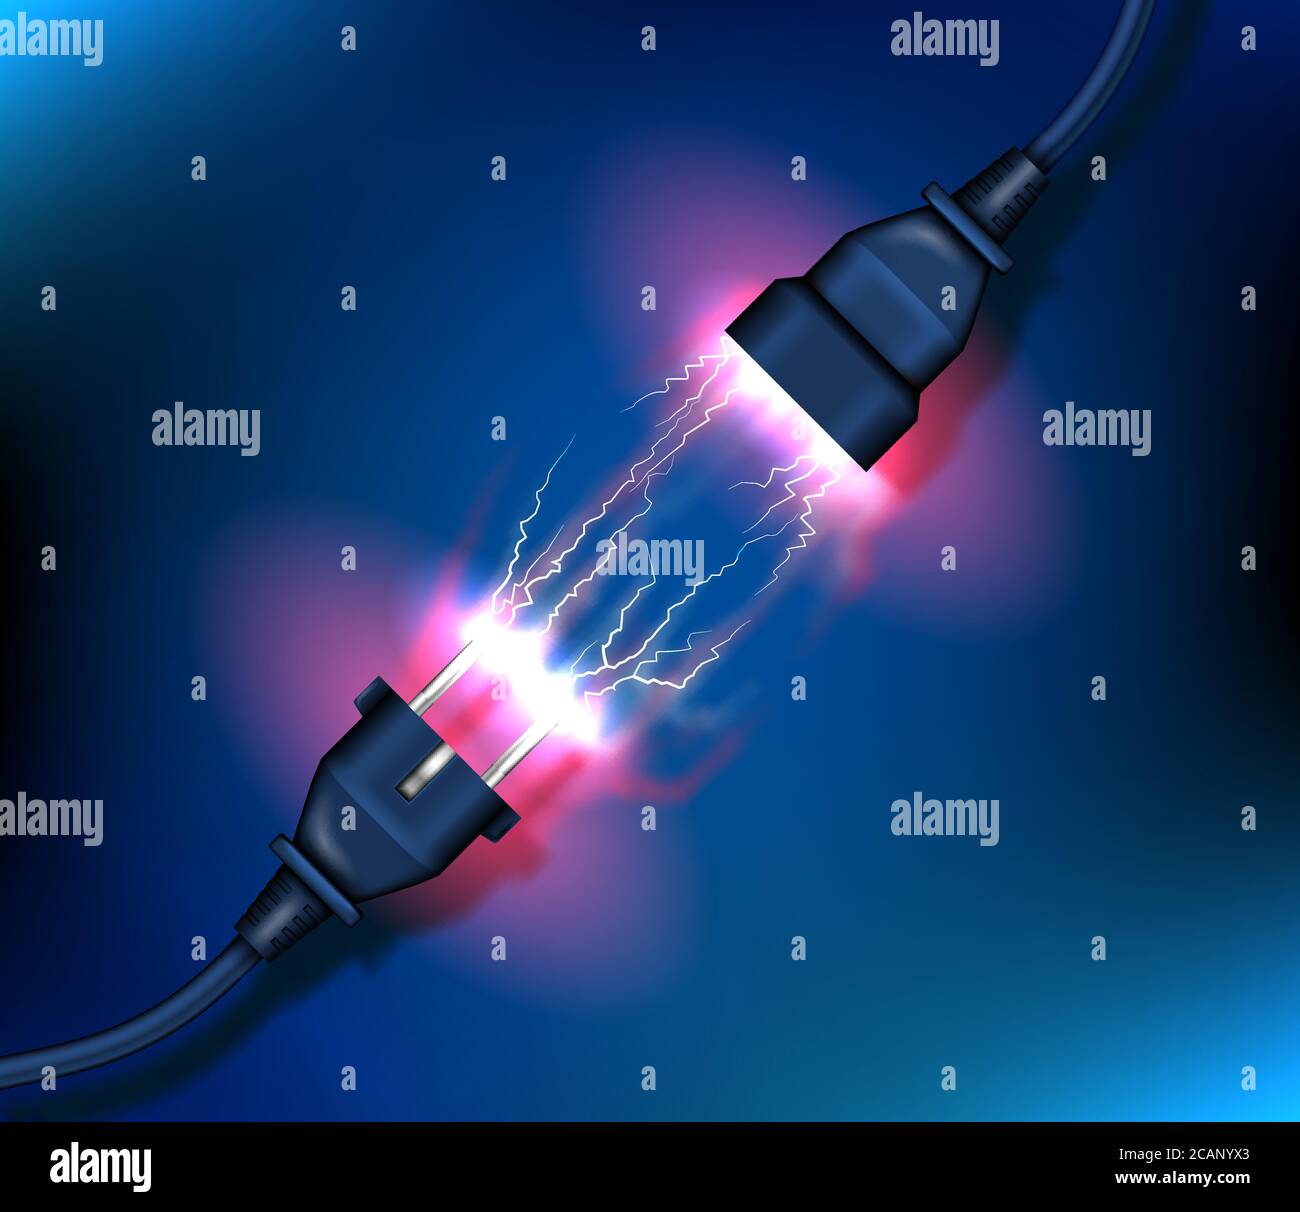 Vector electric plug and socket with electric sparkles unplugged. Concept of electrical theme for banner, brochure, flyer, advertising booklet Stock Vector